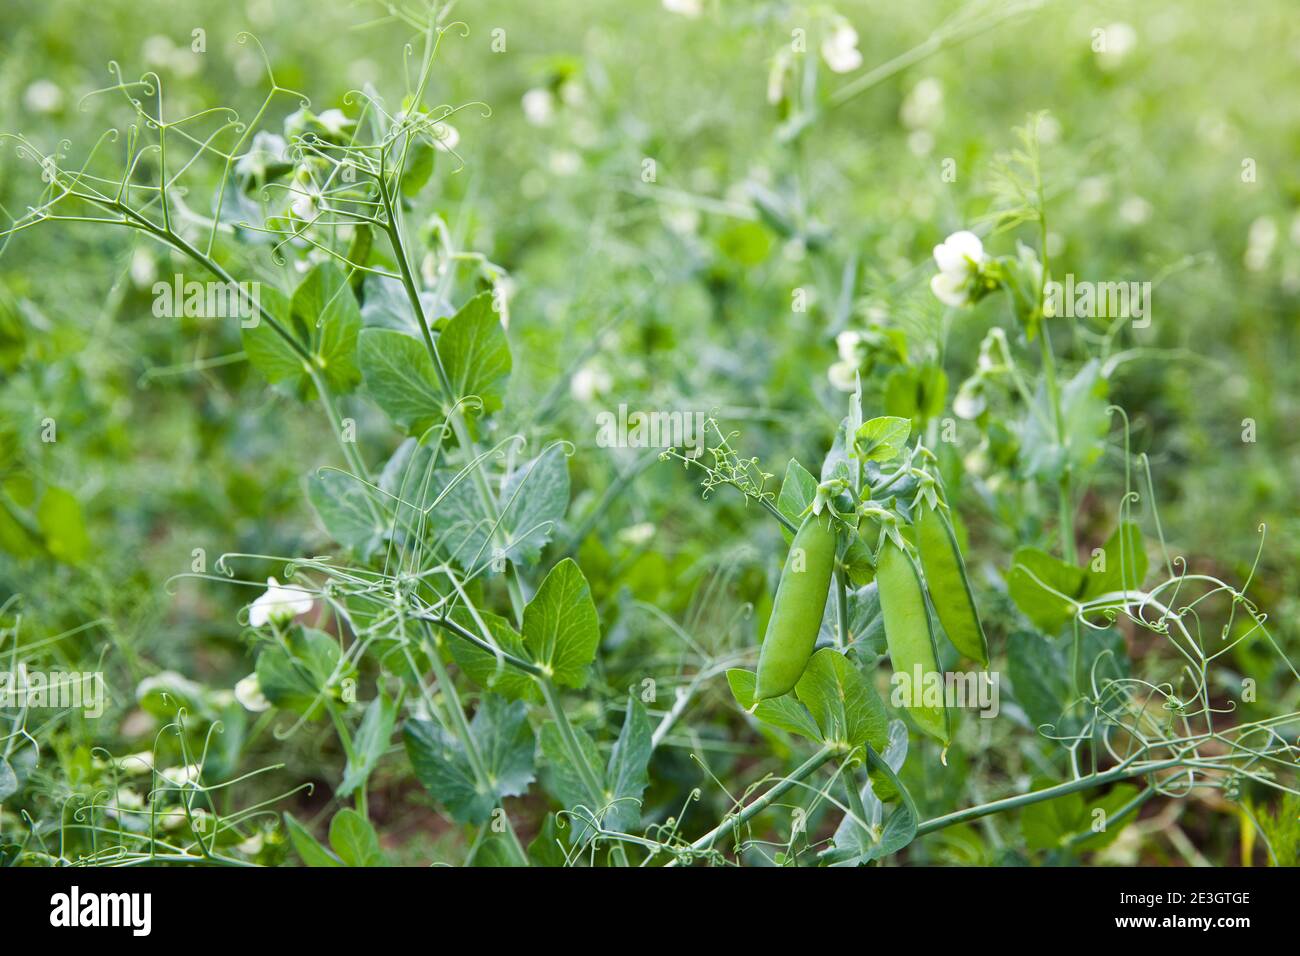 Green pea pods on a branch. Crop of peas. Summer landscape. Stock Photo